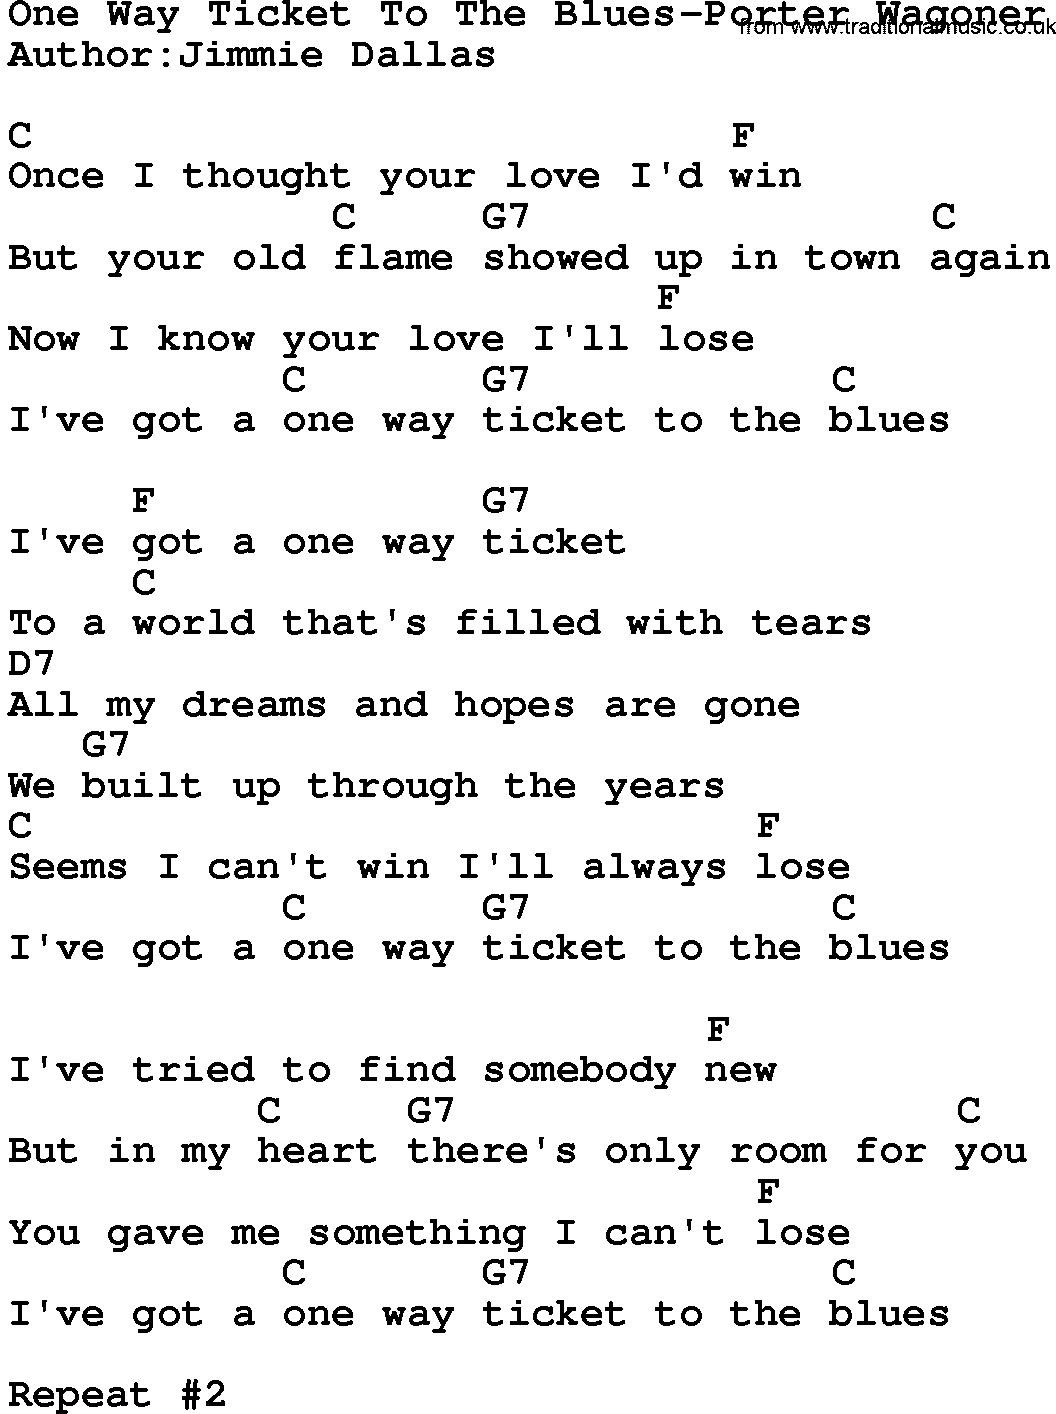 Country music song: One Way Ticket To The Blues-Porter Wagoner lyrics and chords